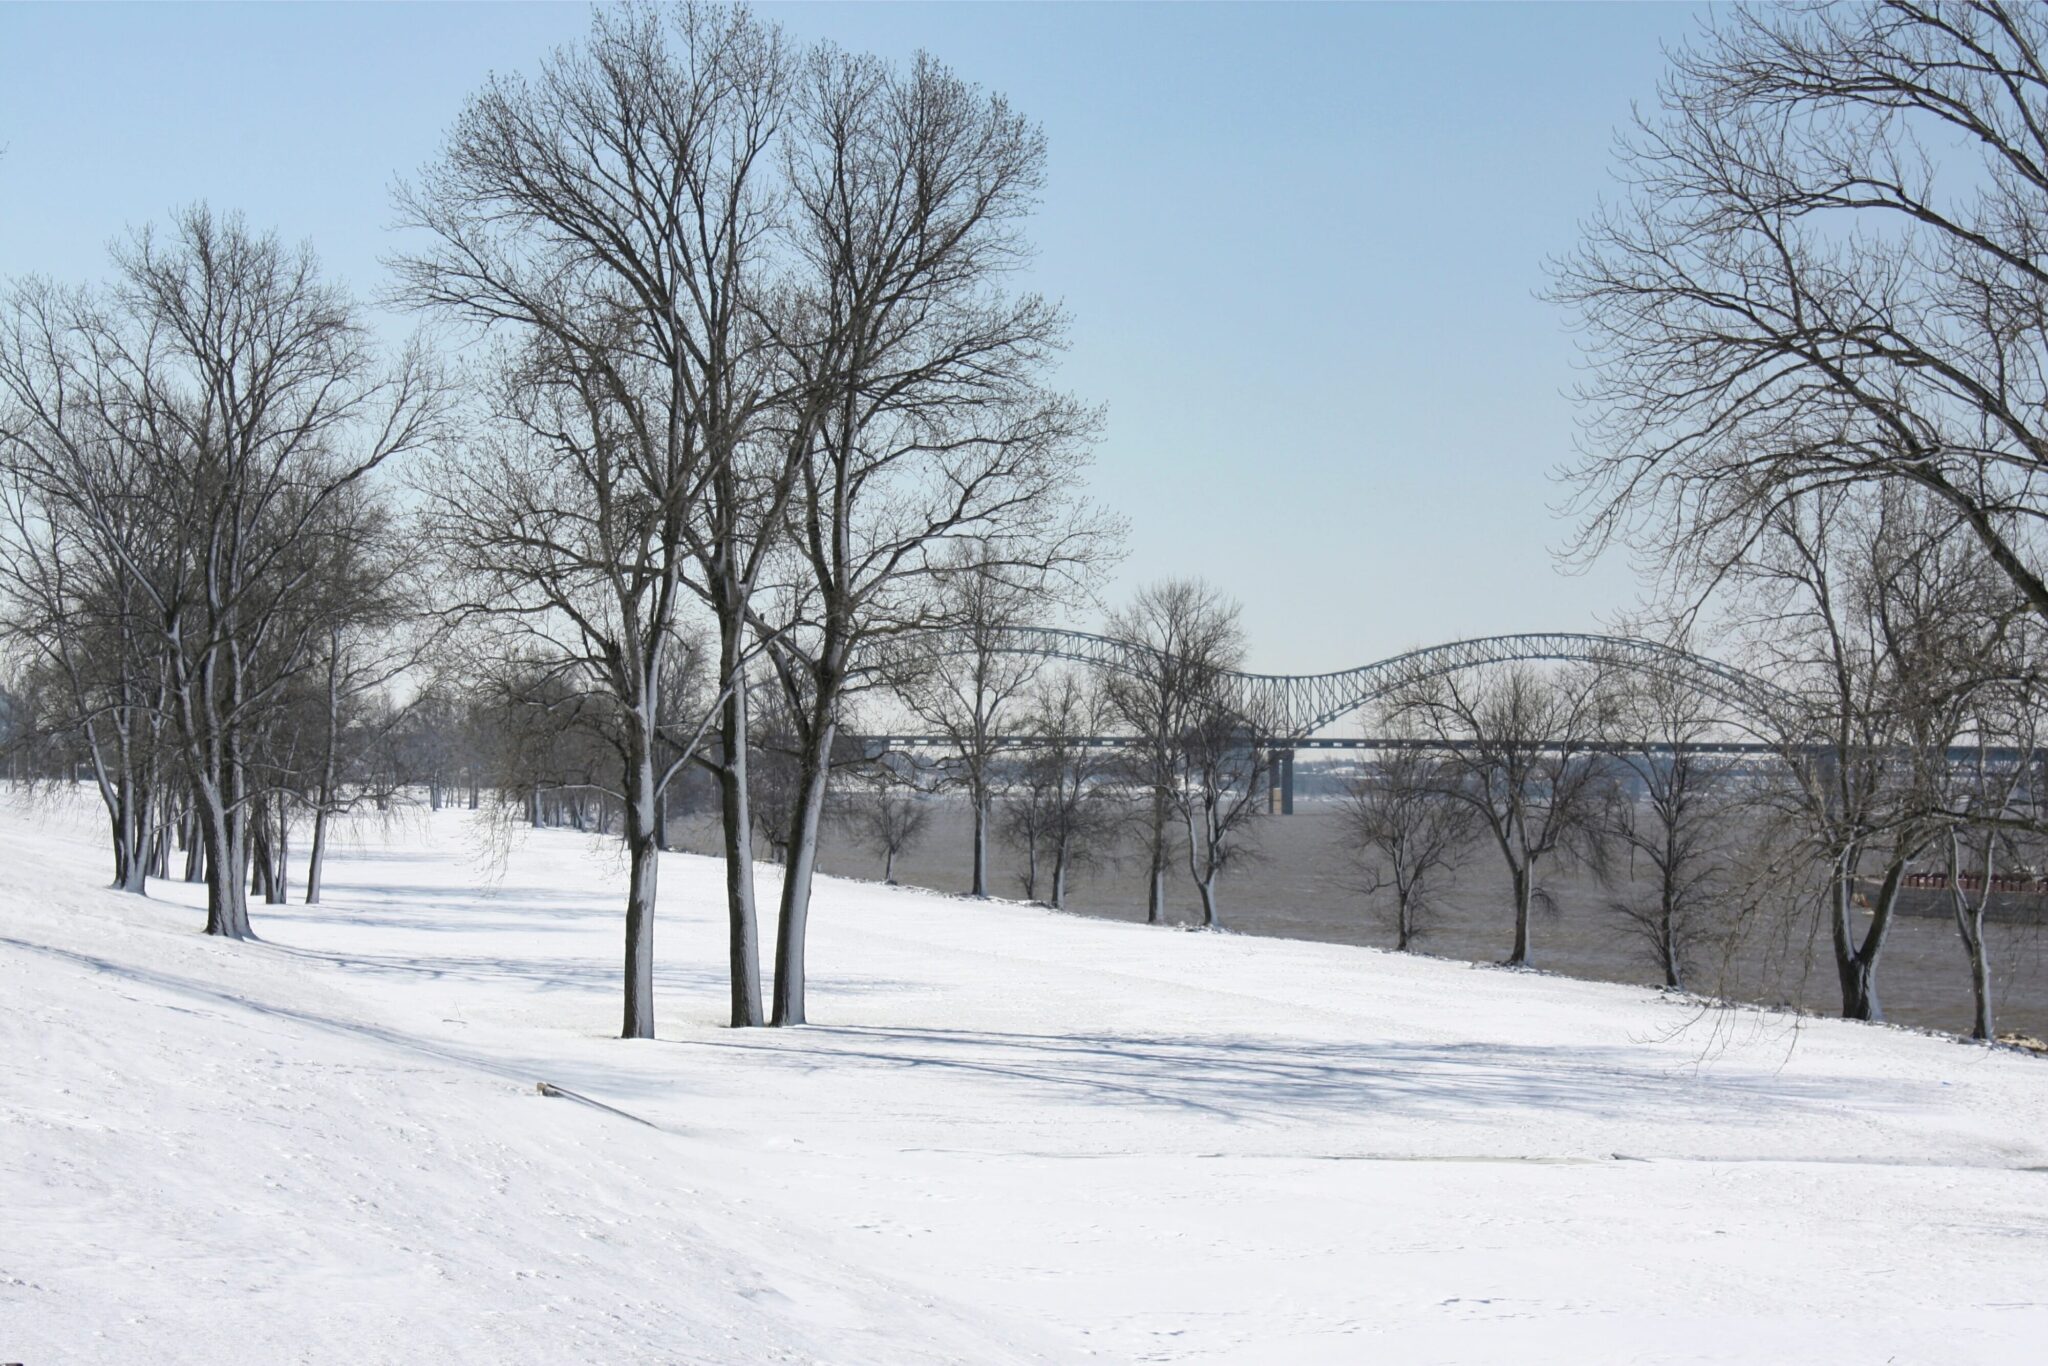 Winter scene of a park featuring snow-laden trees and a tranquil river